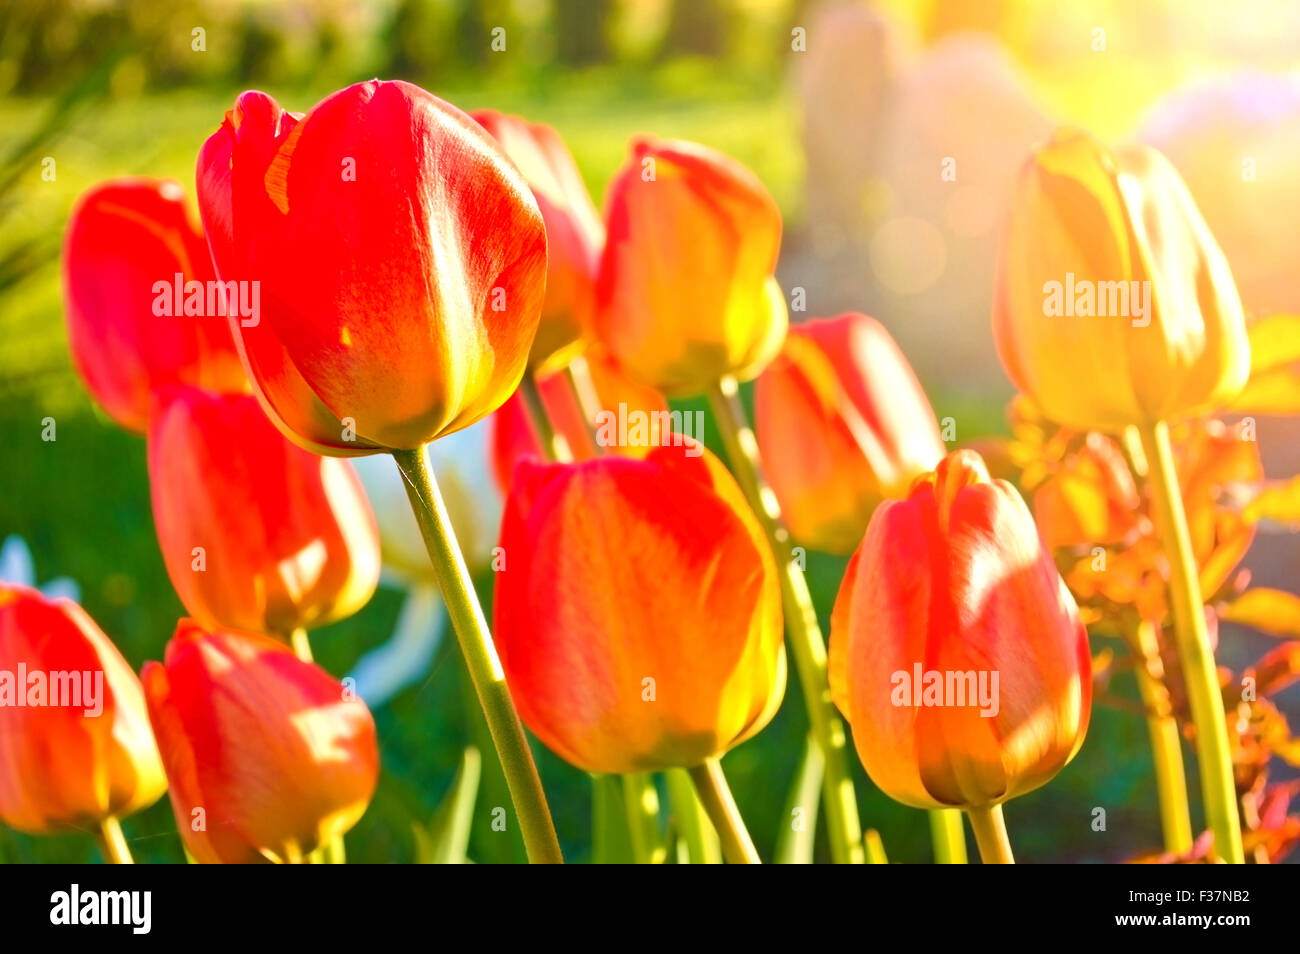 Blooming flowers in the green grass at spring. Nature and spring background. Stock Photo